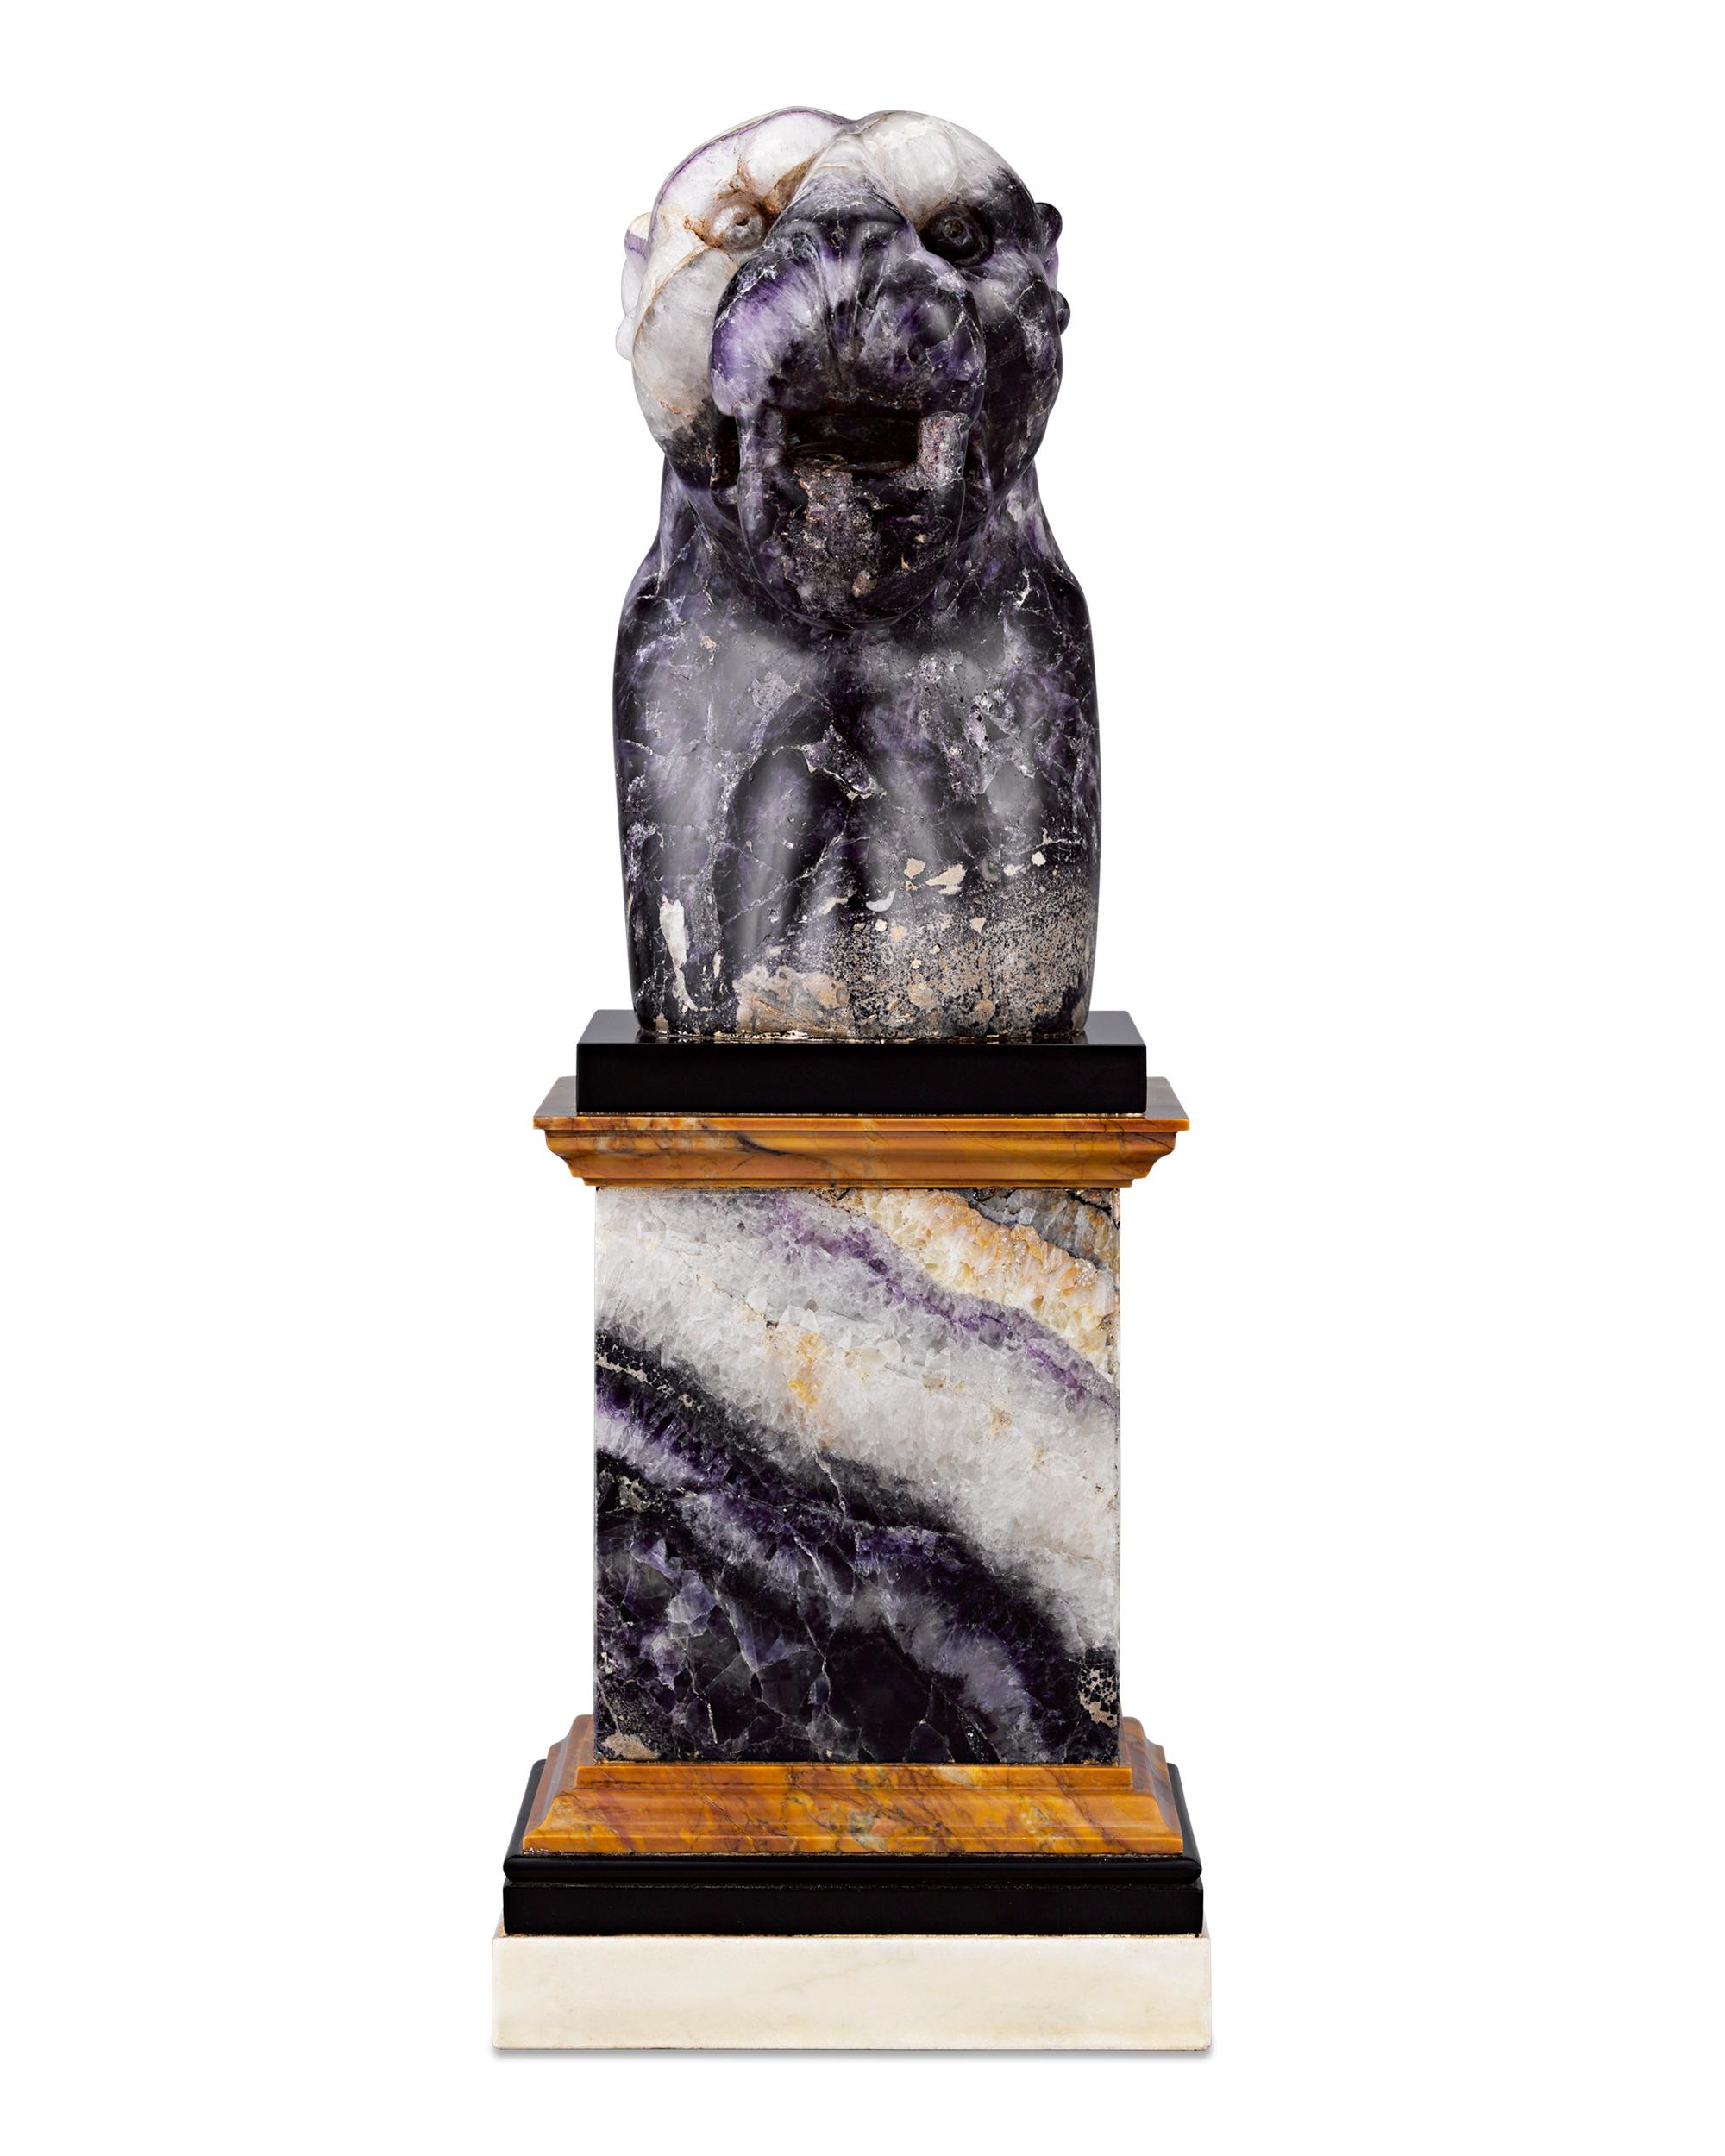 One of the only known sculptures rendered in Blue John to exist in the world, this extraordinary George III panther exemplifies Georgian sophistication. Georgian — and later Regency — aesthetics revived classical themes of the ancient Mediterranean